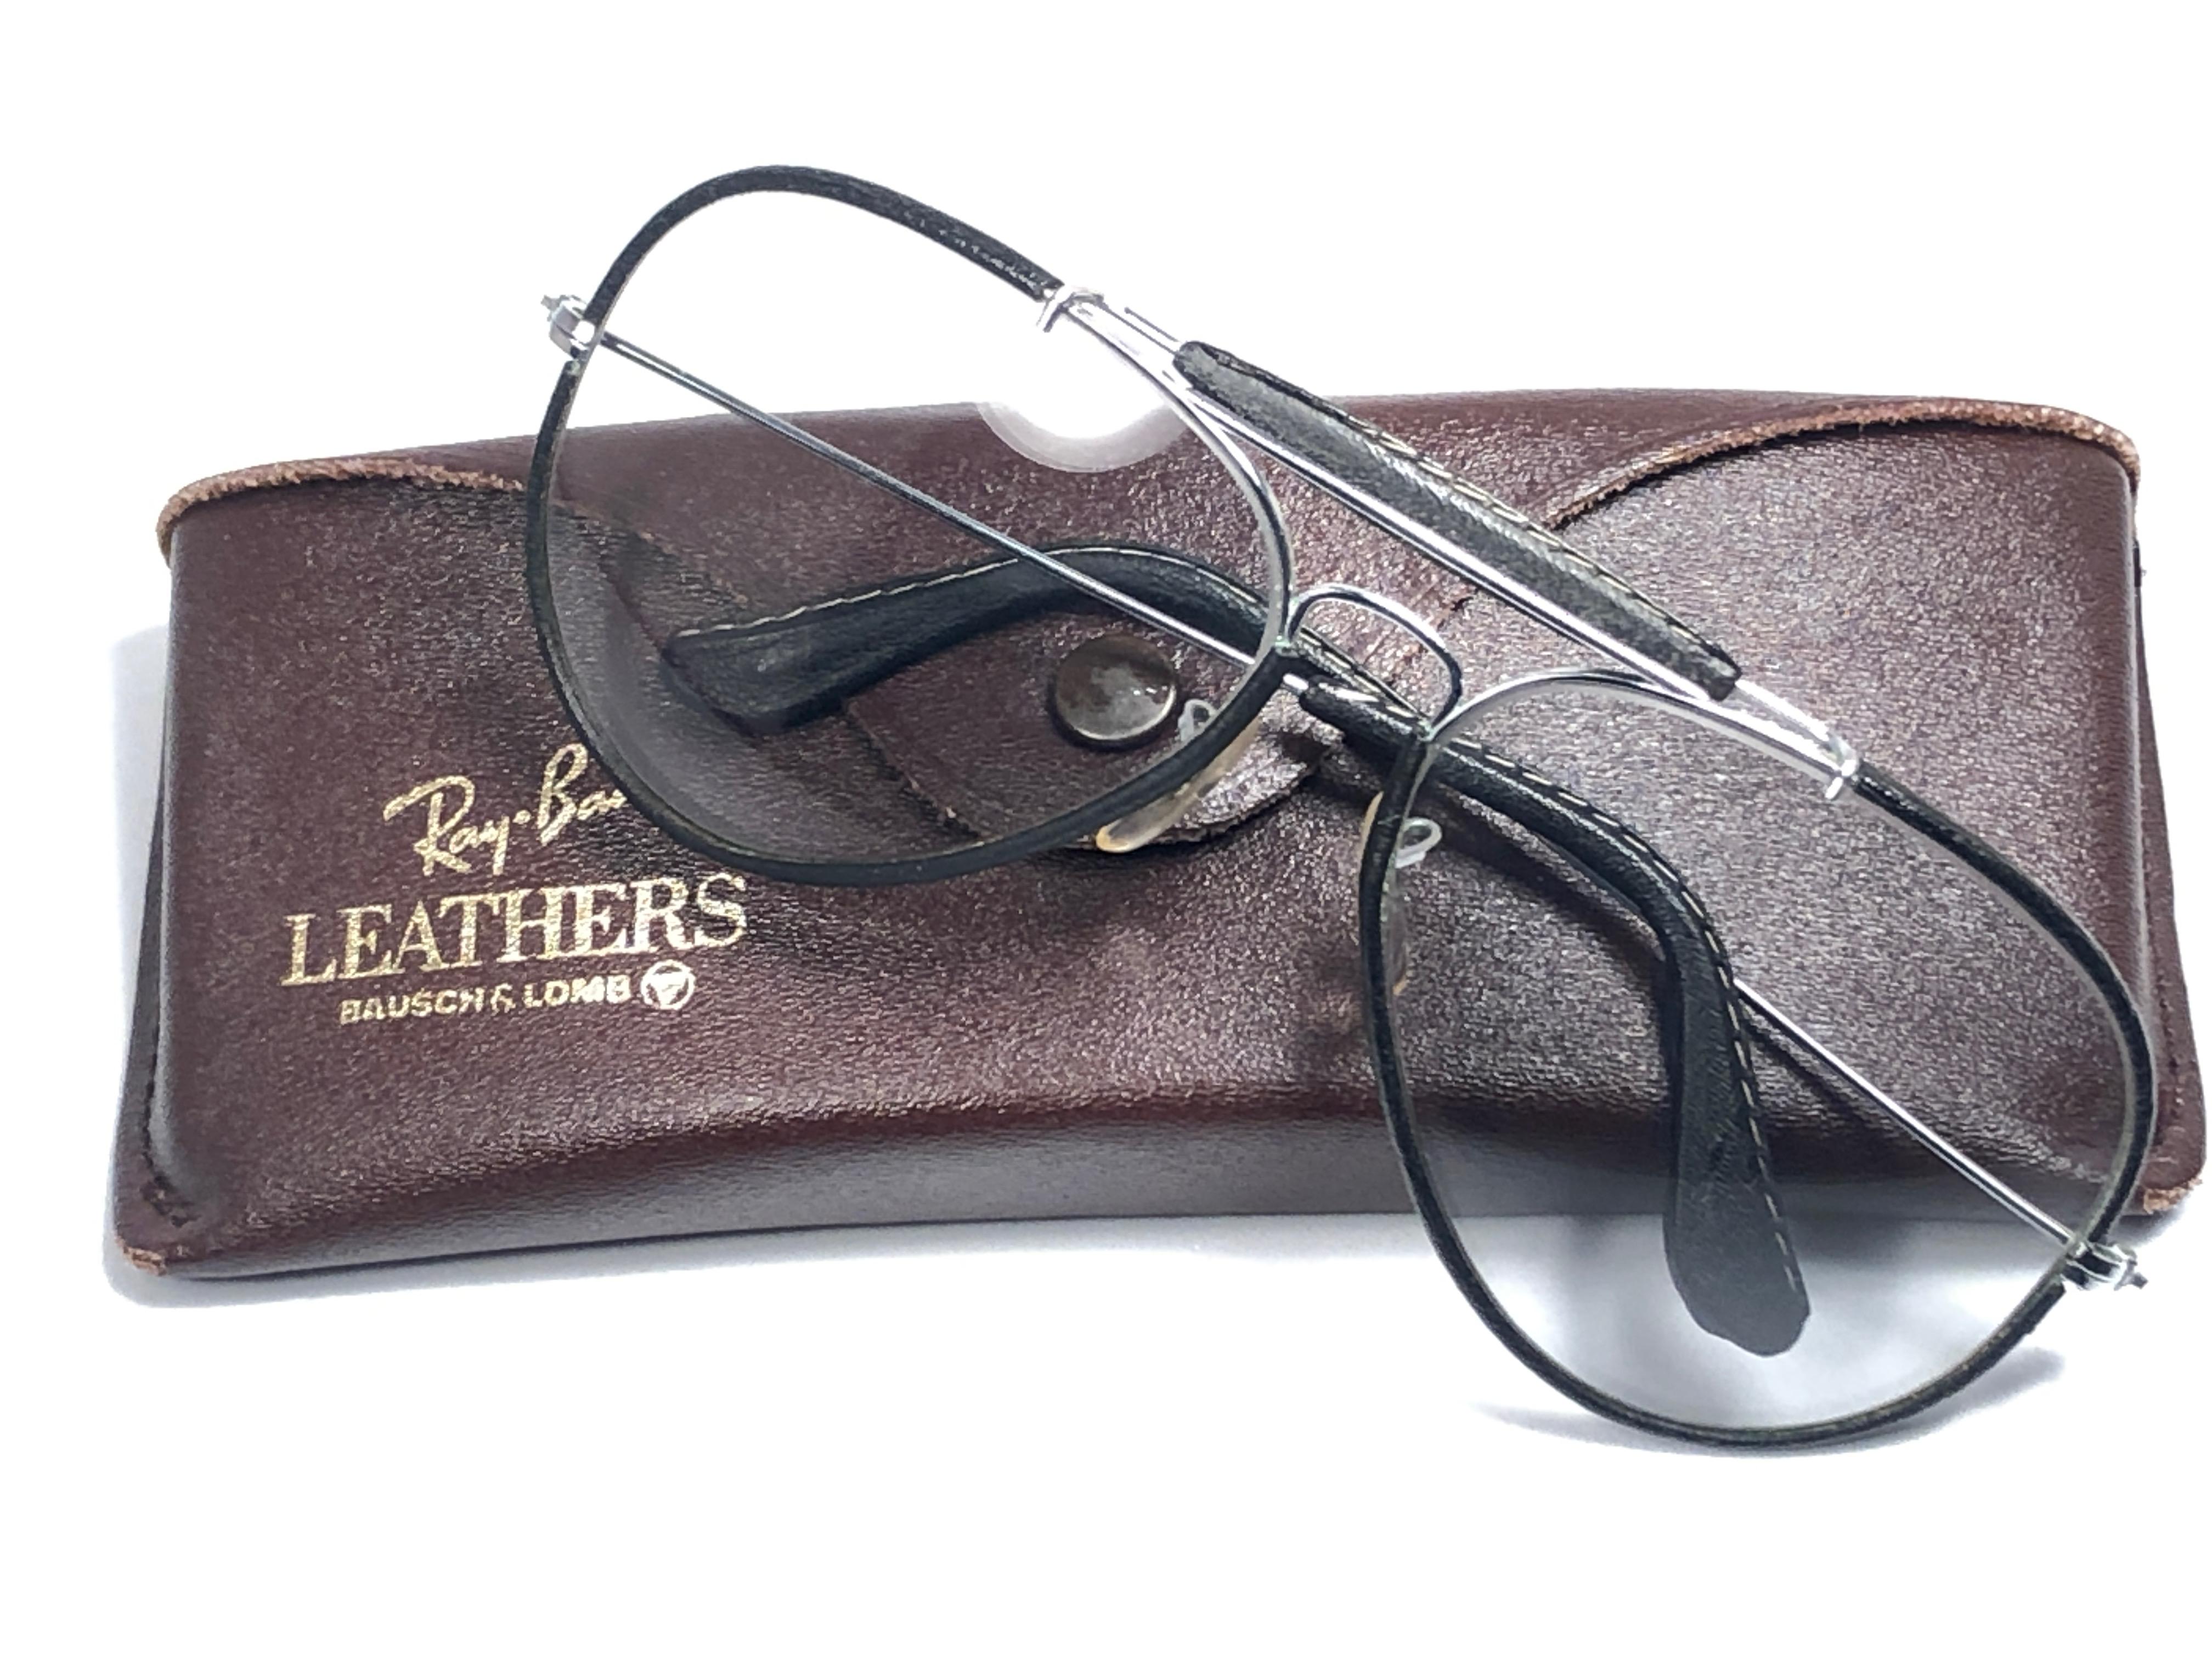 
New Vintage Ray Ban Outdoorsman black 62Mm leather with grey changeable lenses with Ray Ban logo. 

B&L etched in the lenses.

Comes with its original Ray Ban B&L case. Please notice this item may show minor sign of wear due to storage.

Designed